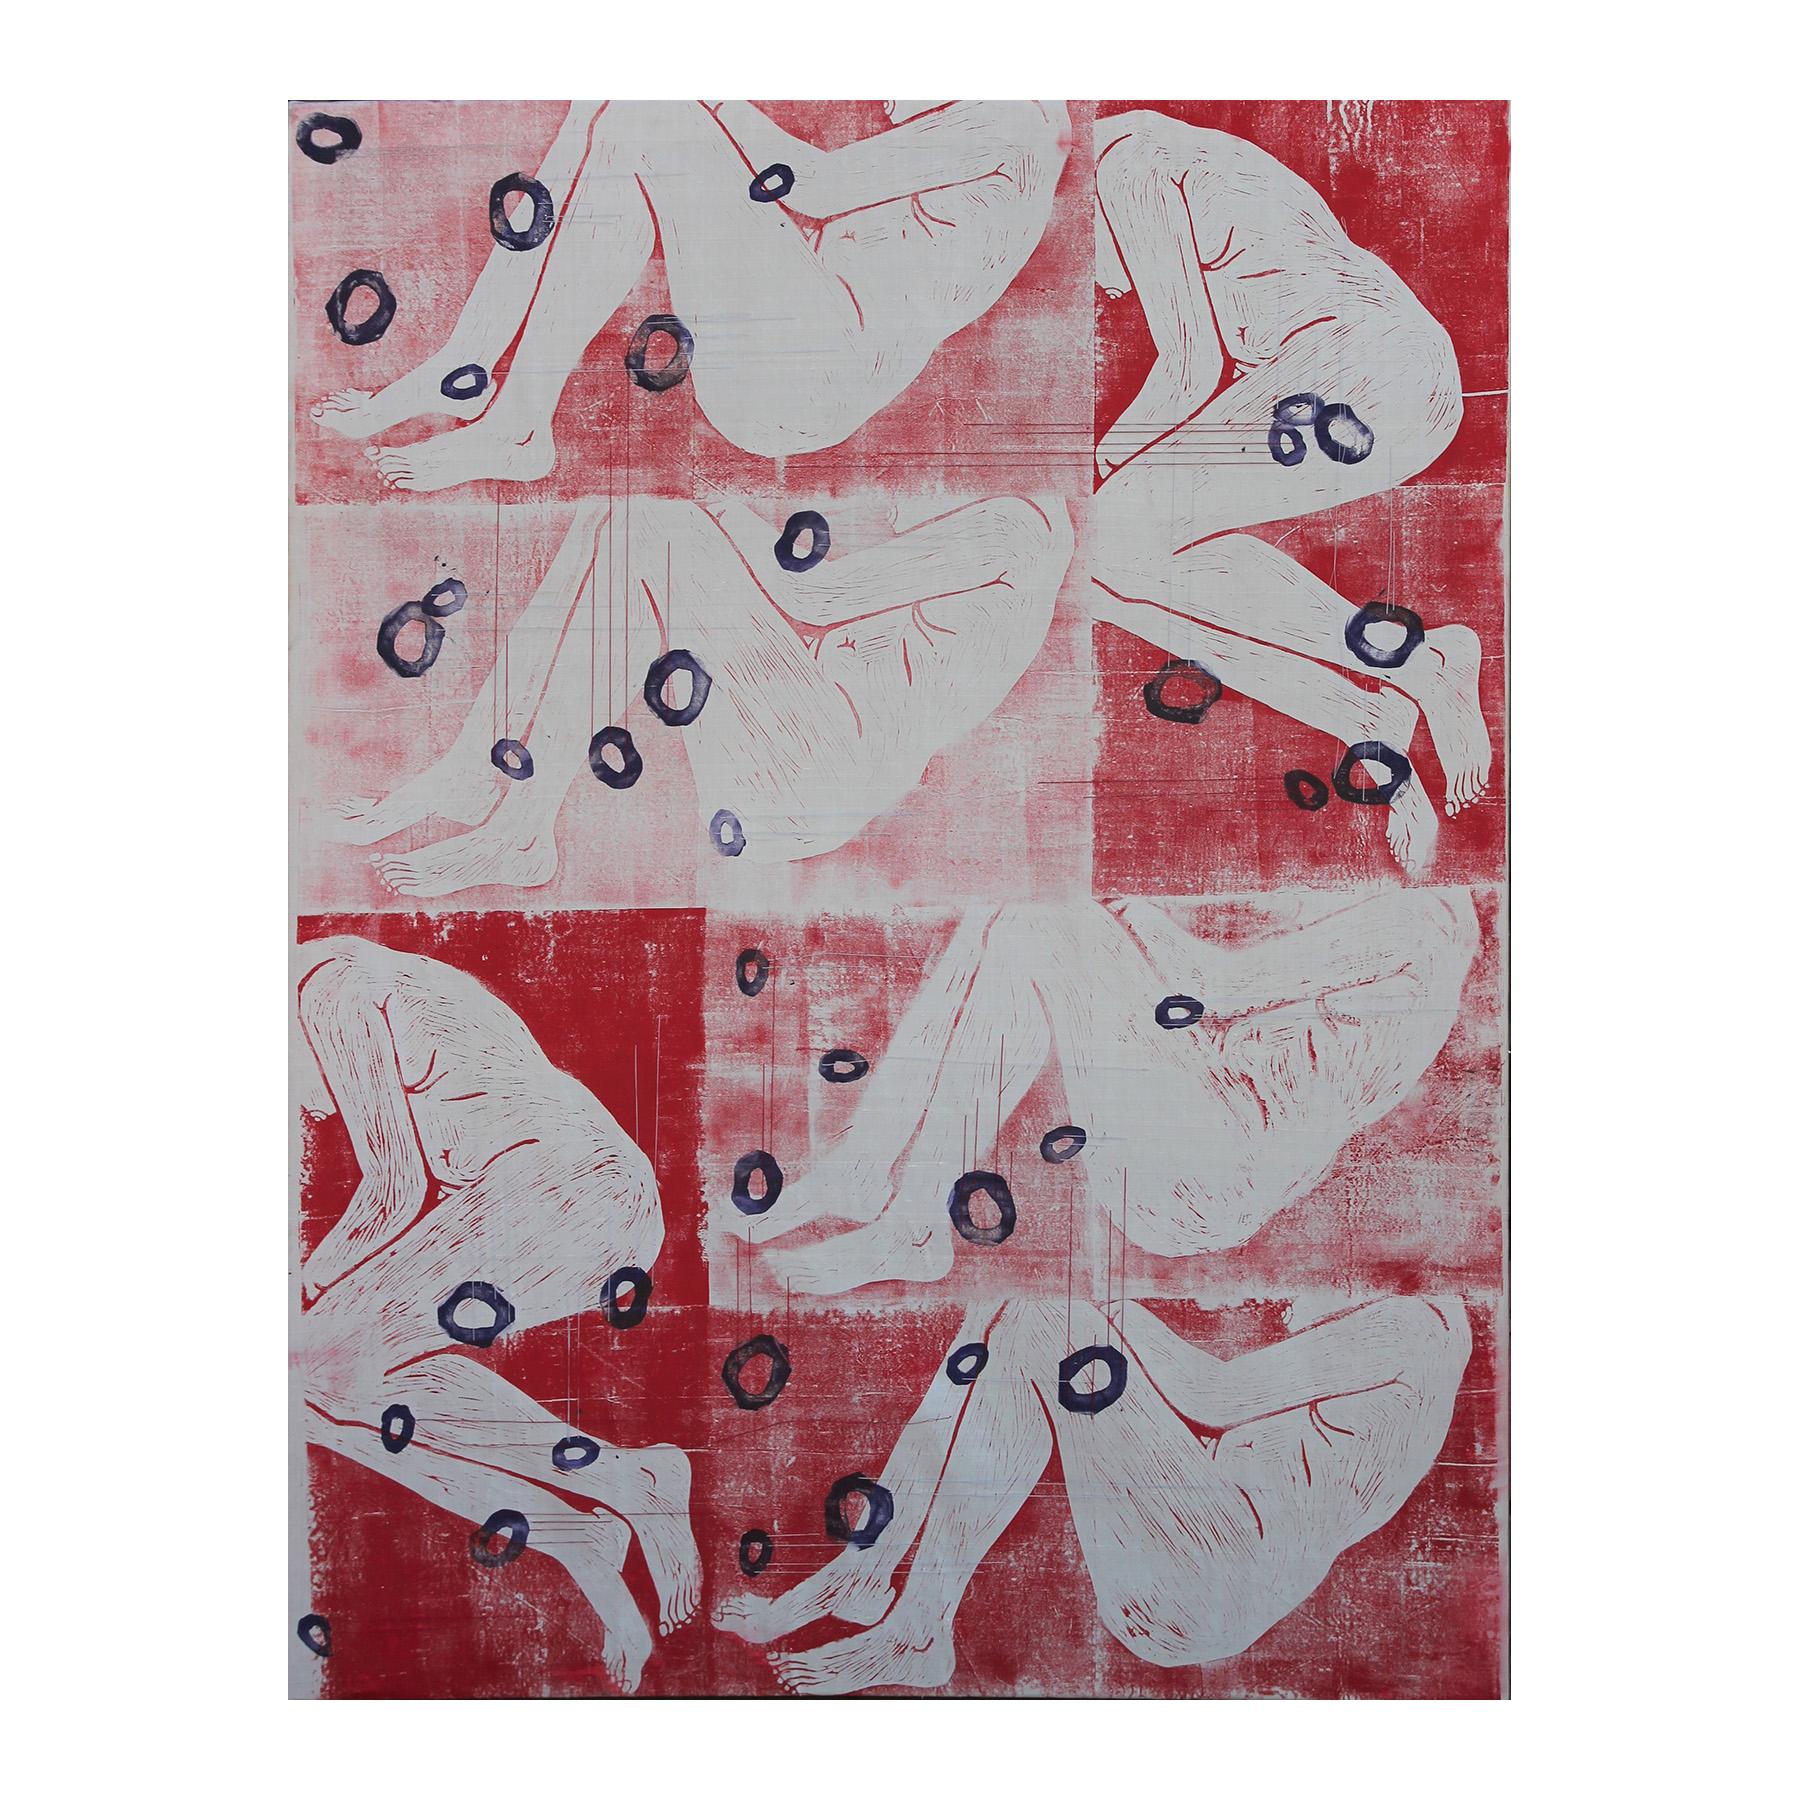 Modern Abstract Red & White Figurative Mixed Media Painting with Thread Accents